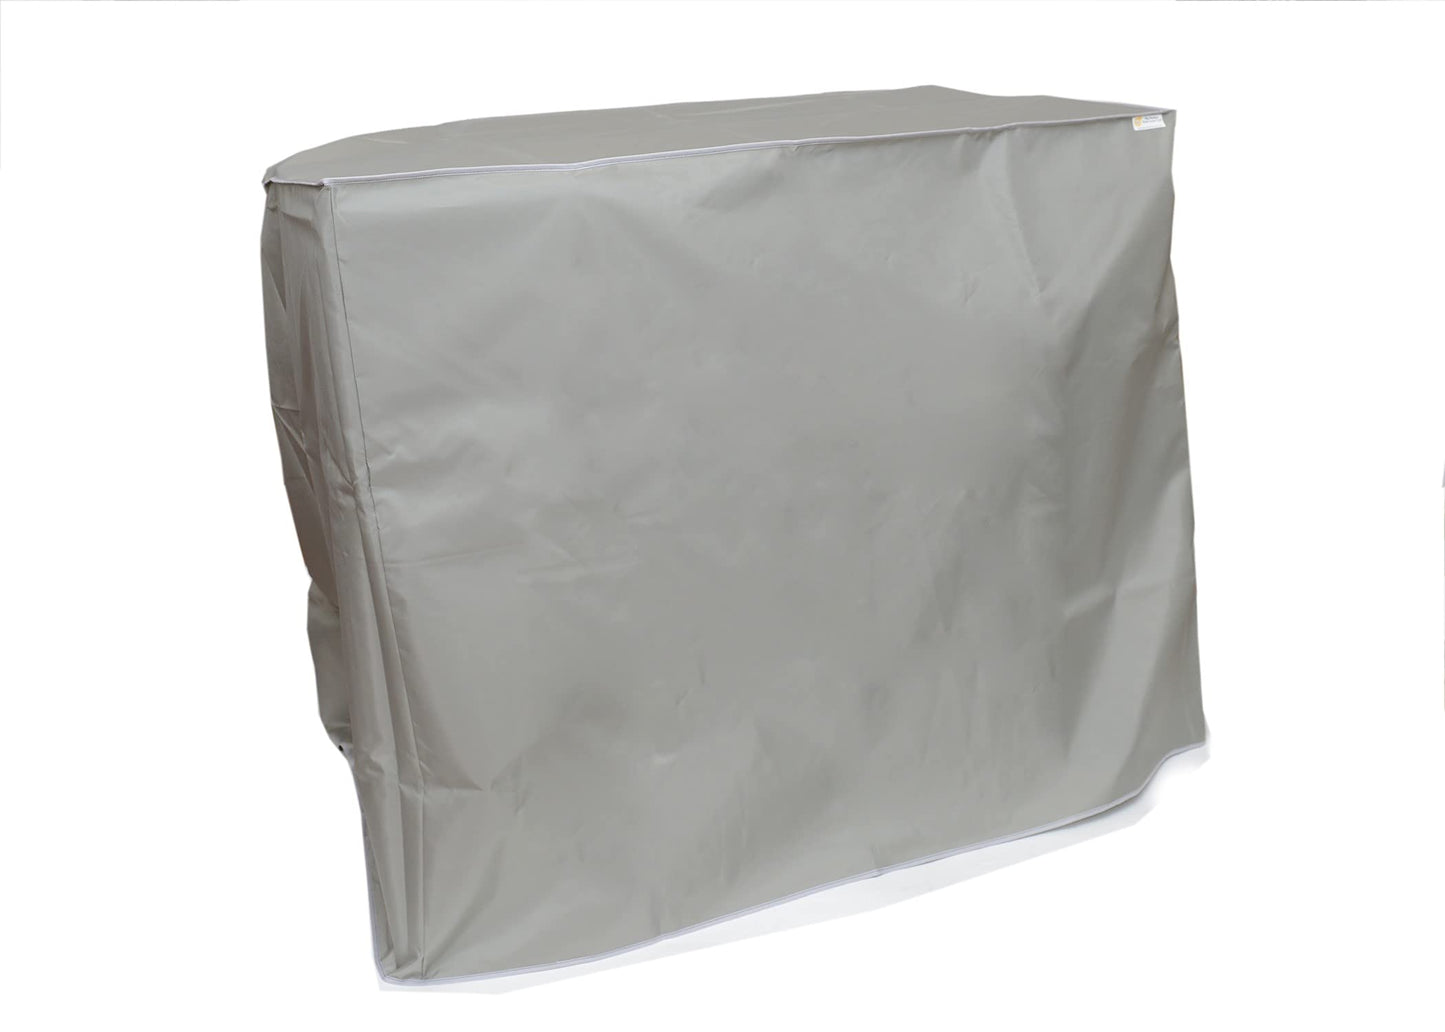 The Perfect Dust Cover, Silver Gray Nylon Cover Compatible with Graphtec FC-5100-150 60'' Cutting Plotter, Anti Static and Waterproof Dust Cover, Dimensions 73.2''W x 28.1''D x 46.3''H by The Perfect Dust Cover LLC